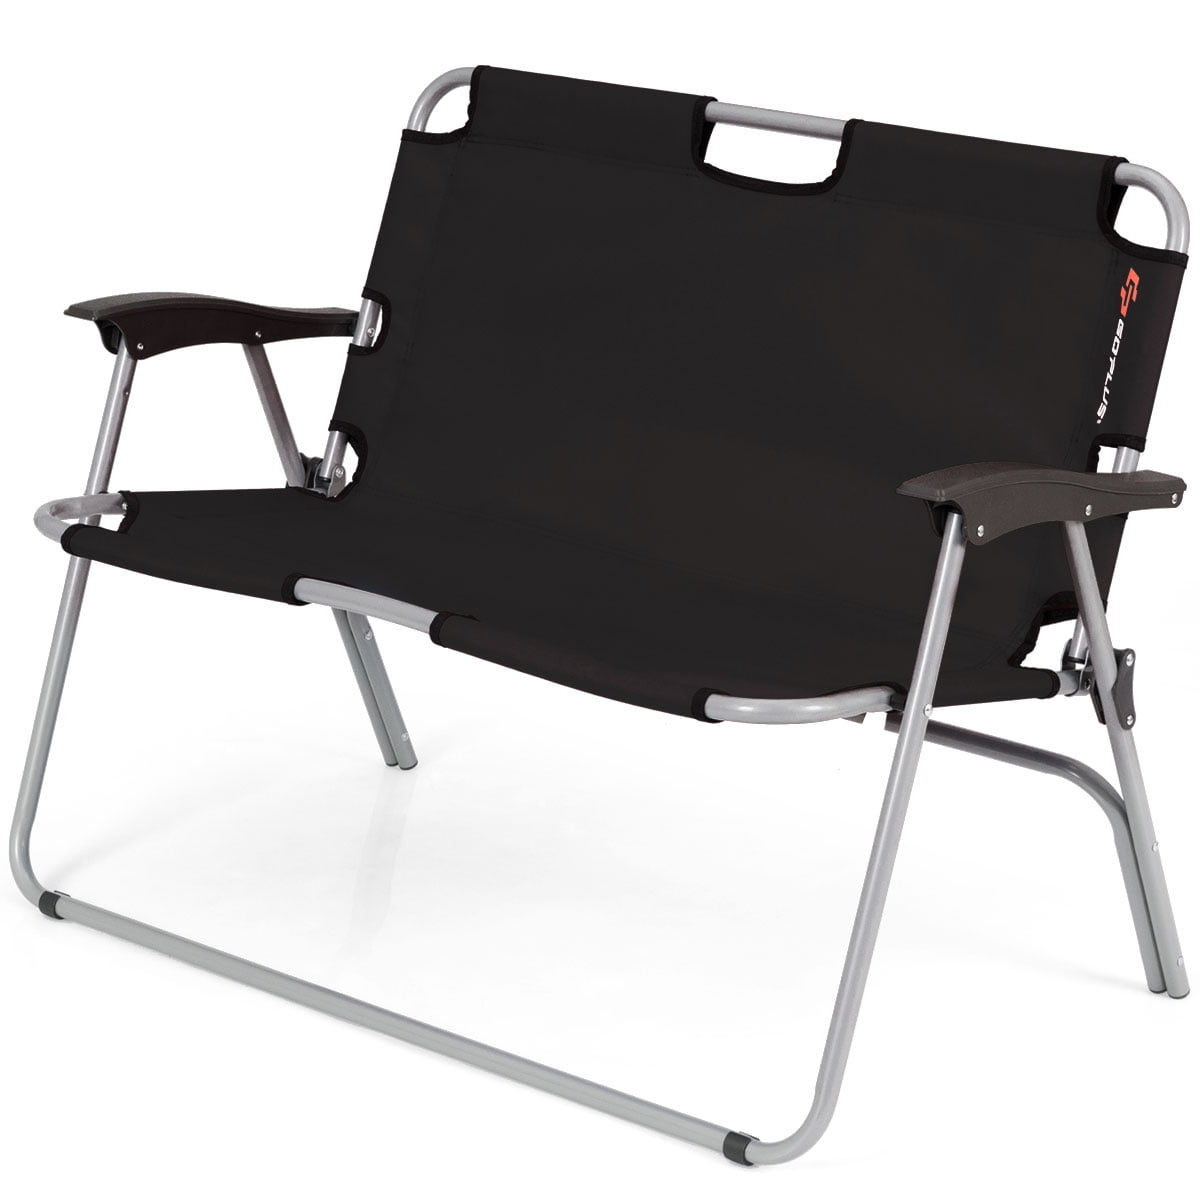 Topbuy 2 Person Camping Folding Chair Loveseat Bench Portable Outdoor Black